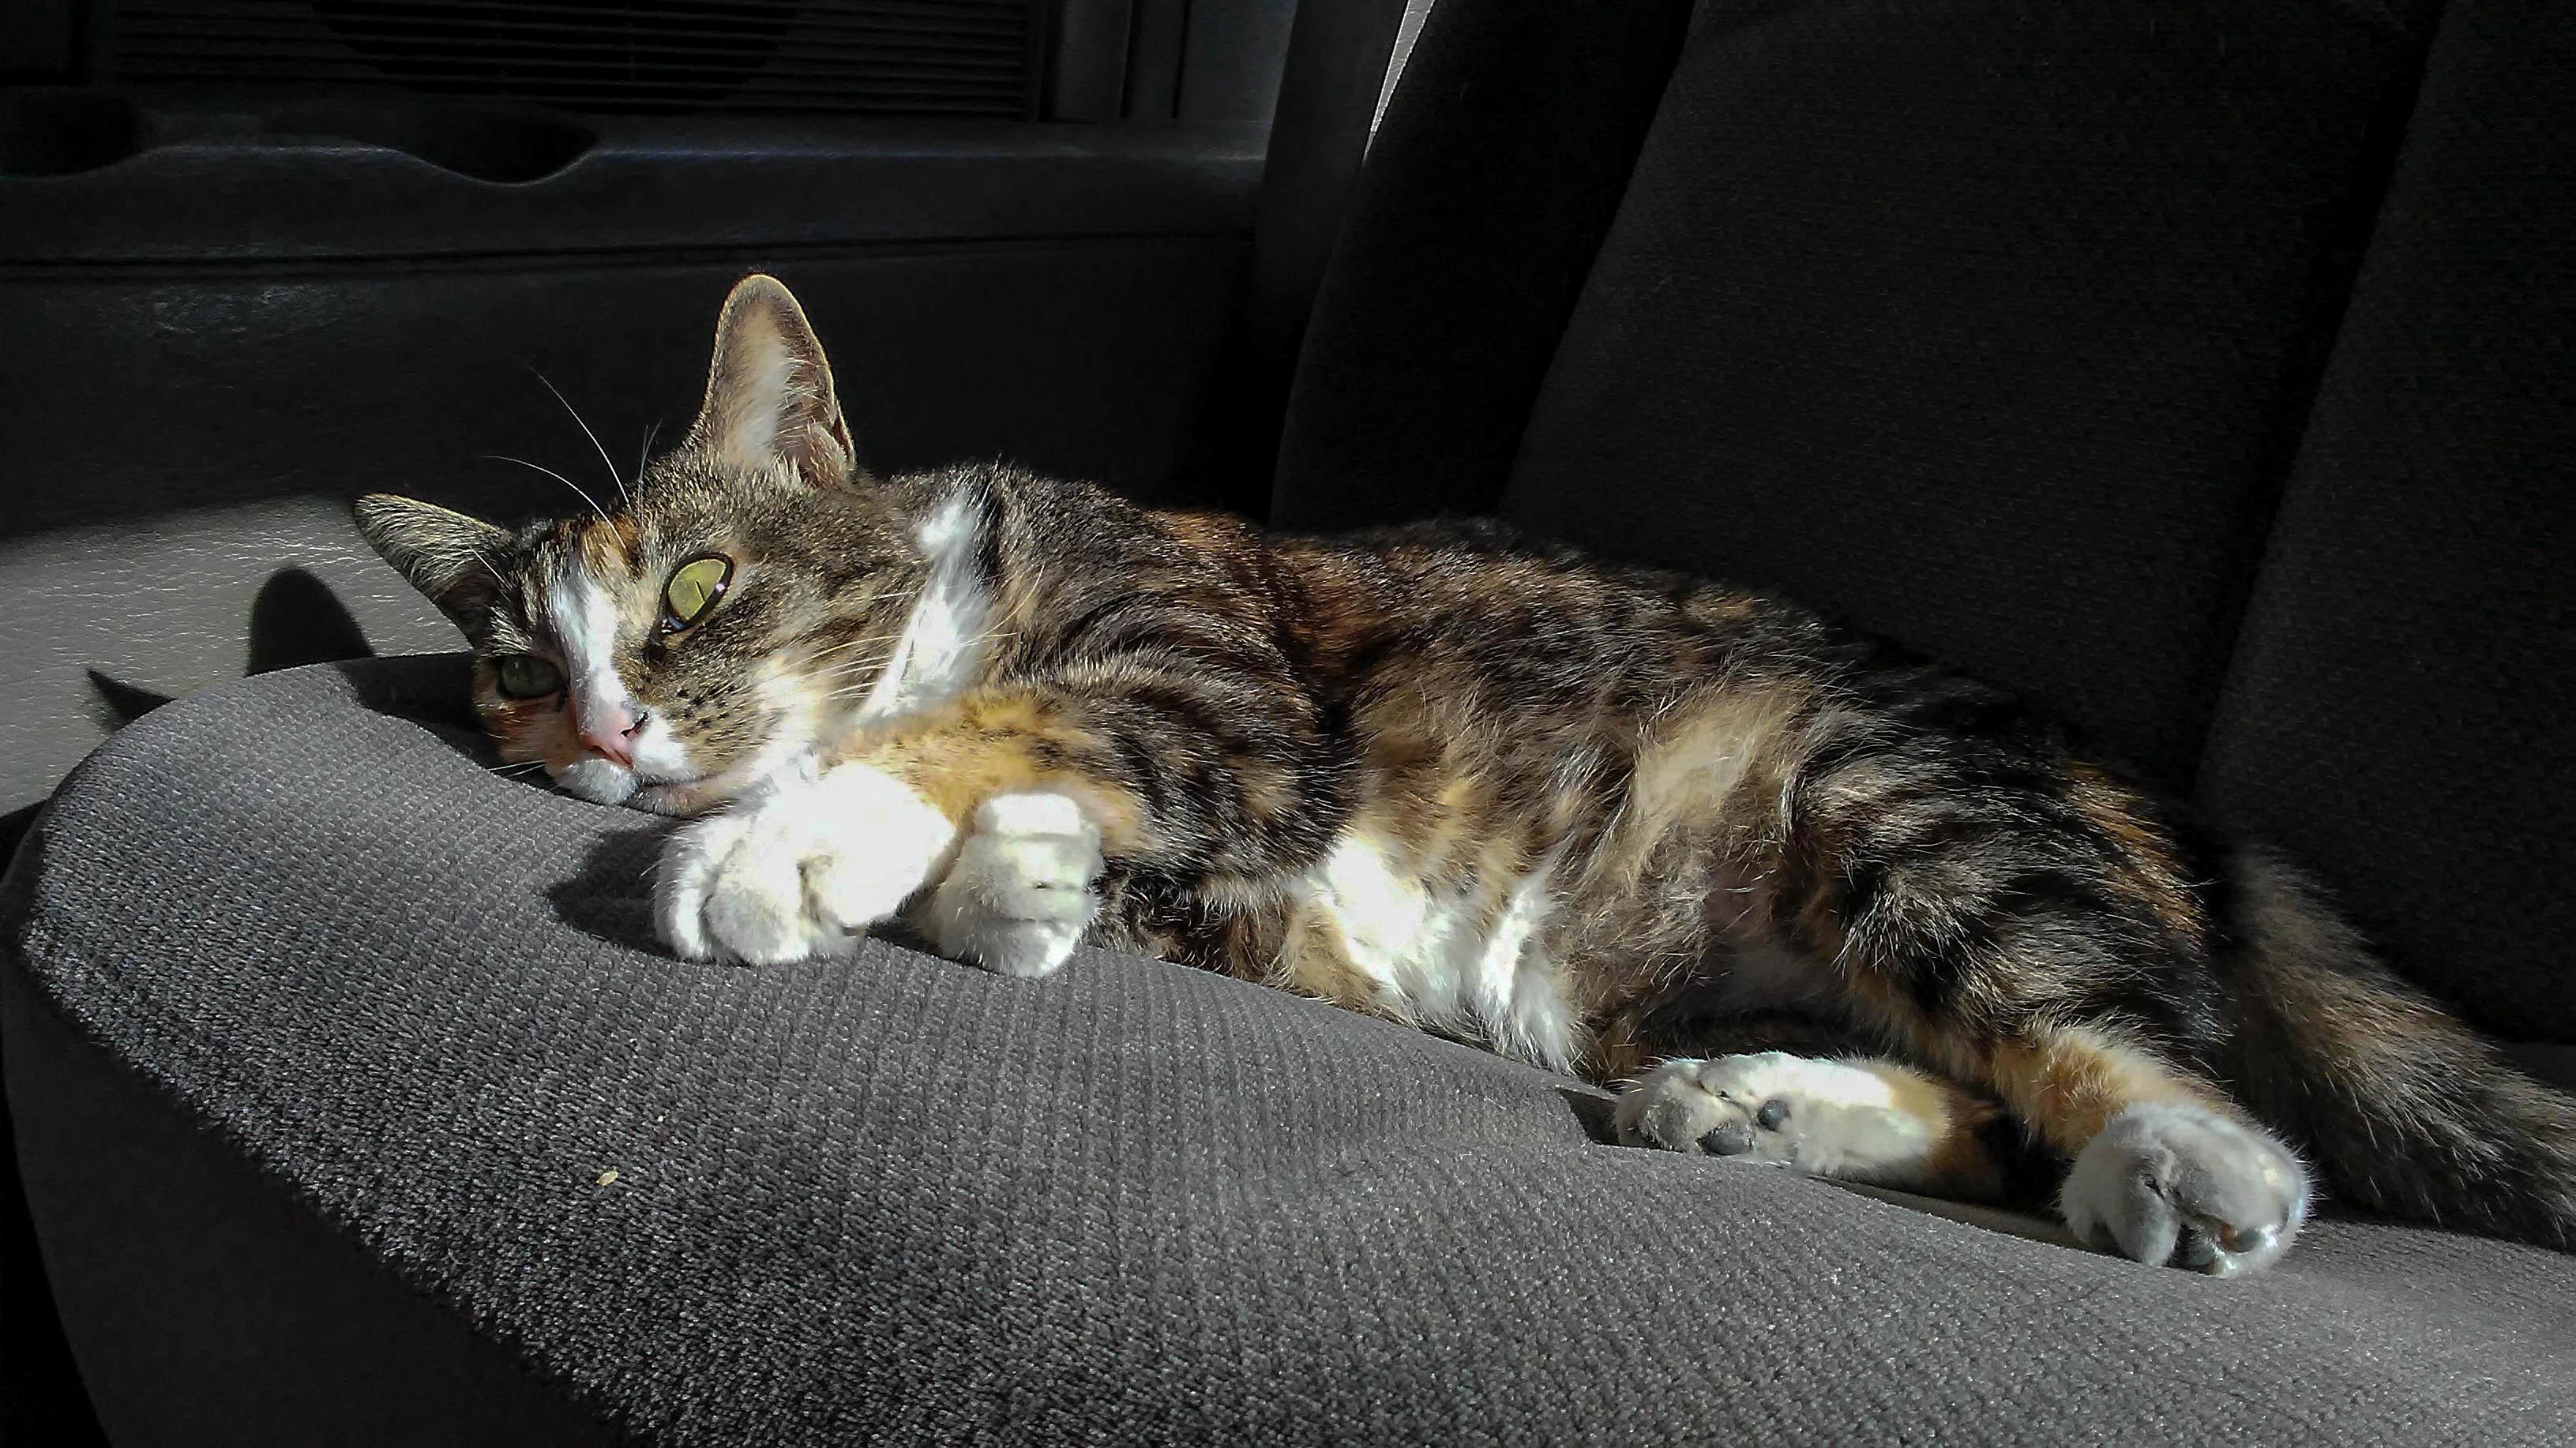 Tawny loves the old van. it was the comfy warm place as a kitten.